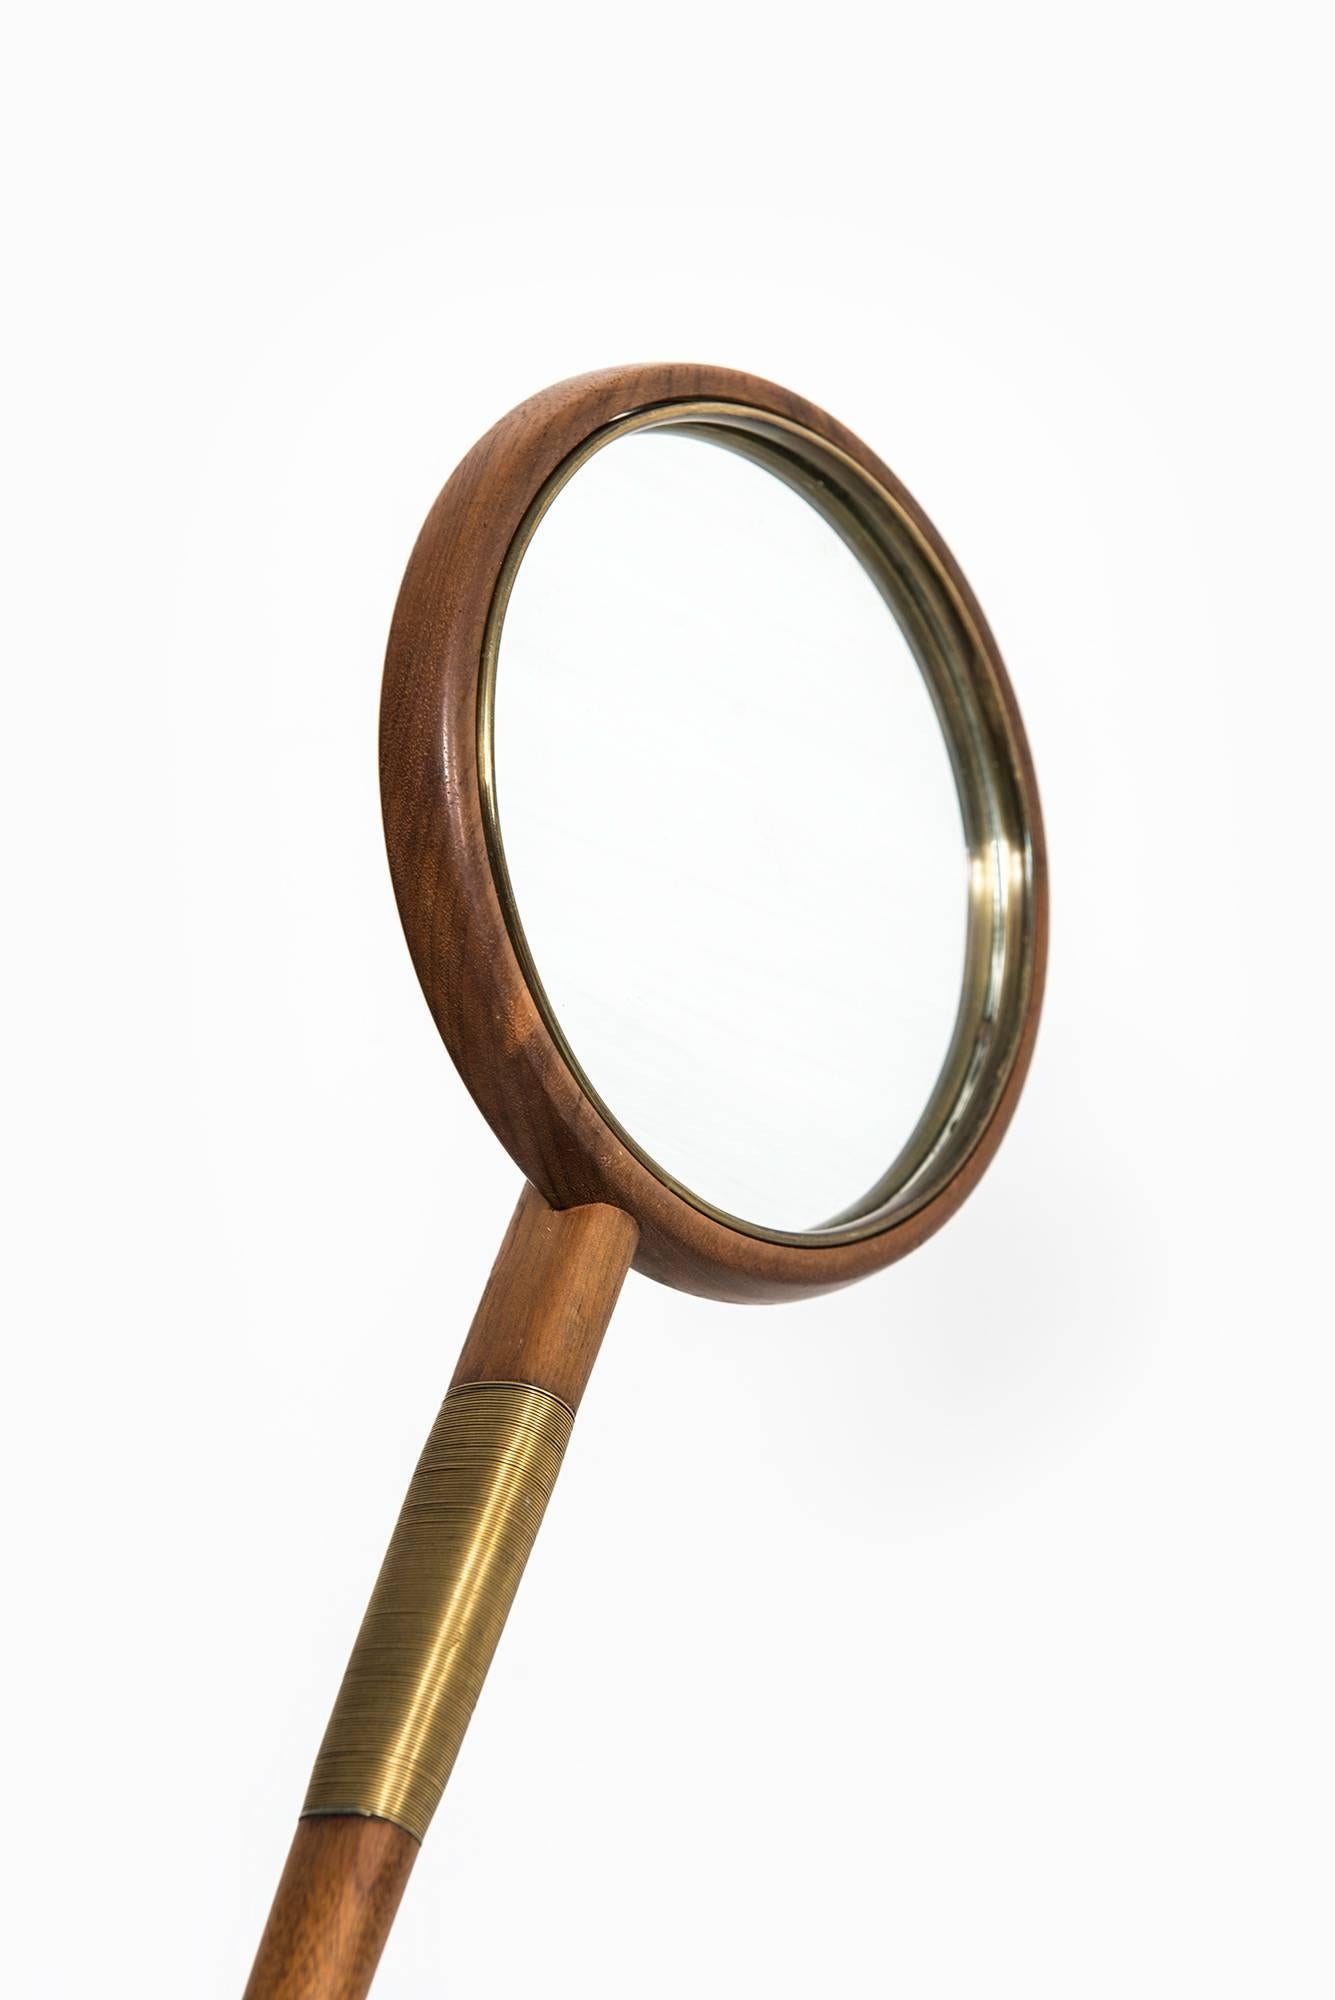 Rare hand mirror probably produced in Sweden.